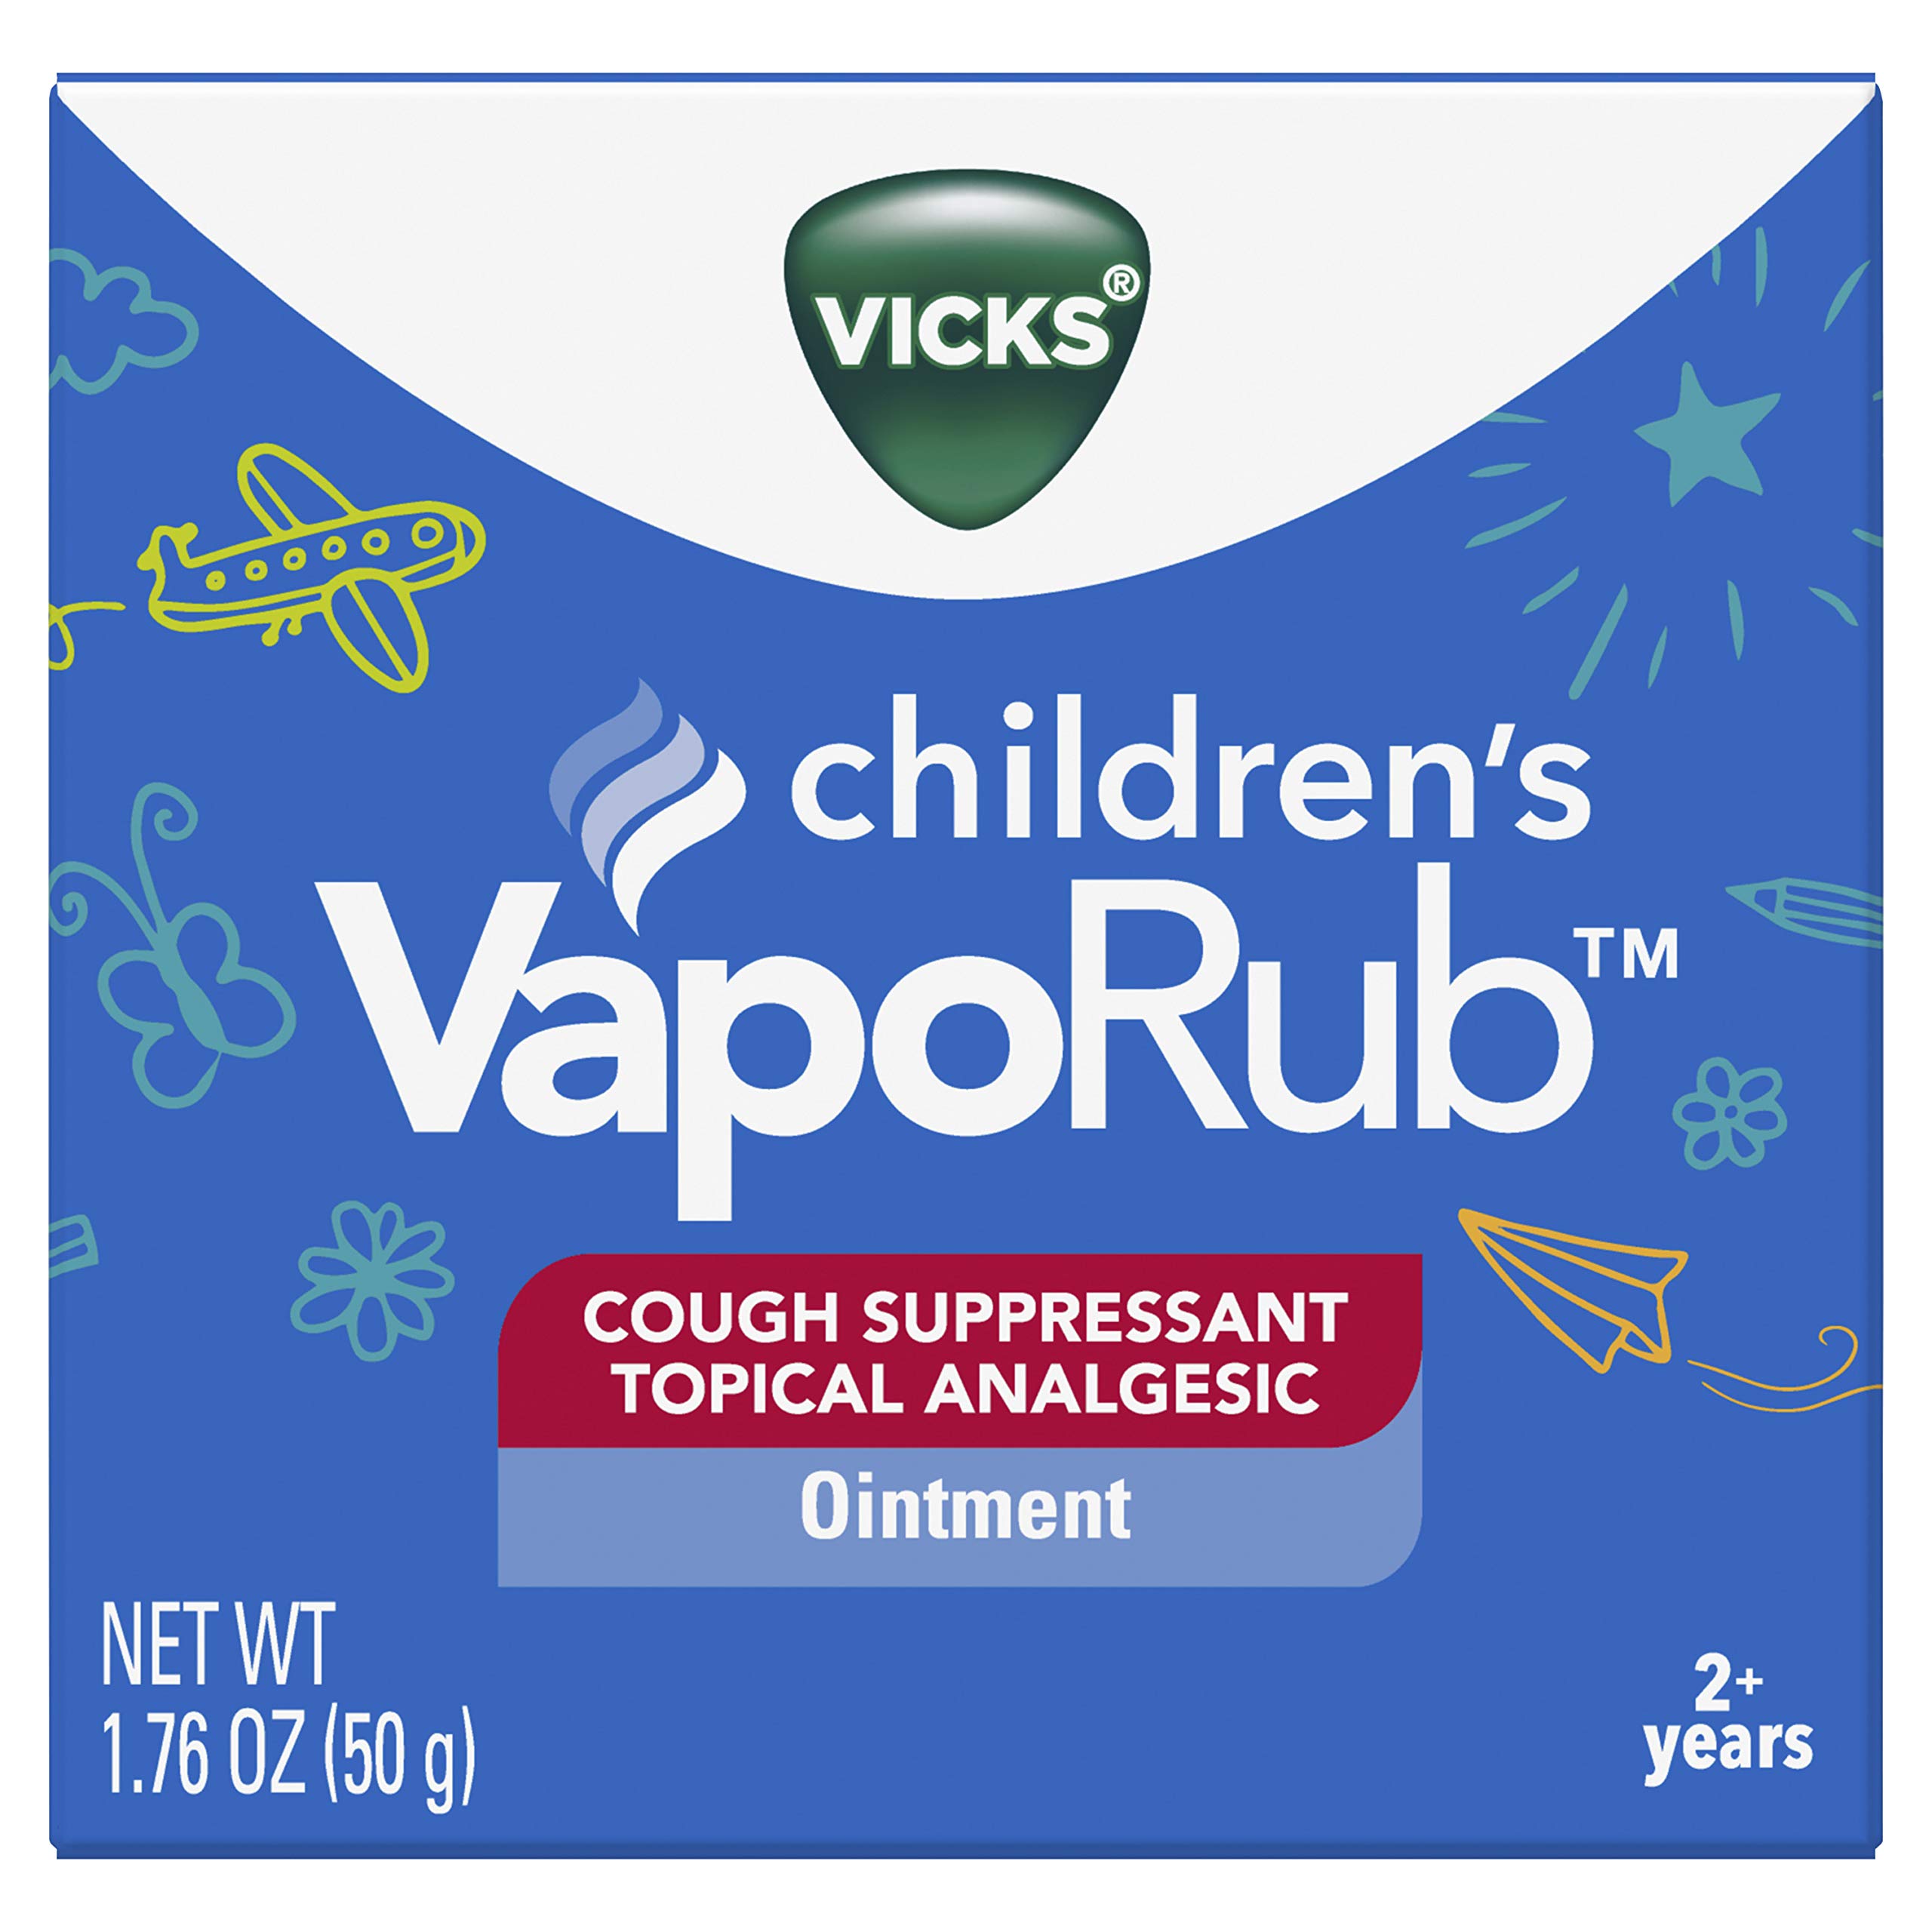 Book Cover Vicks Children's VapoRub, Topical Cough Suppressant and Analgesic, Relieves Coughs, Minor Aches and Pains, Clinically Proven, Starts Working in Minutes for Fast Relief, For Ages 2+, 1.76 OZ